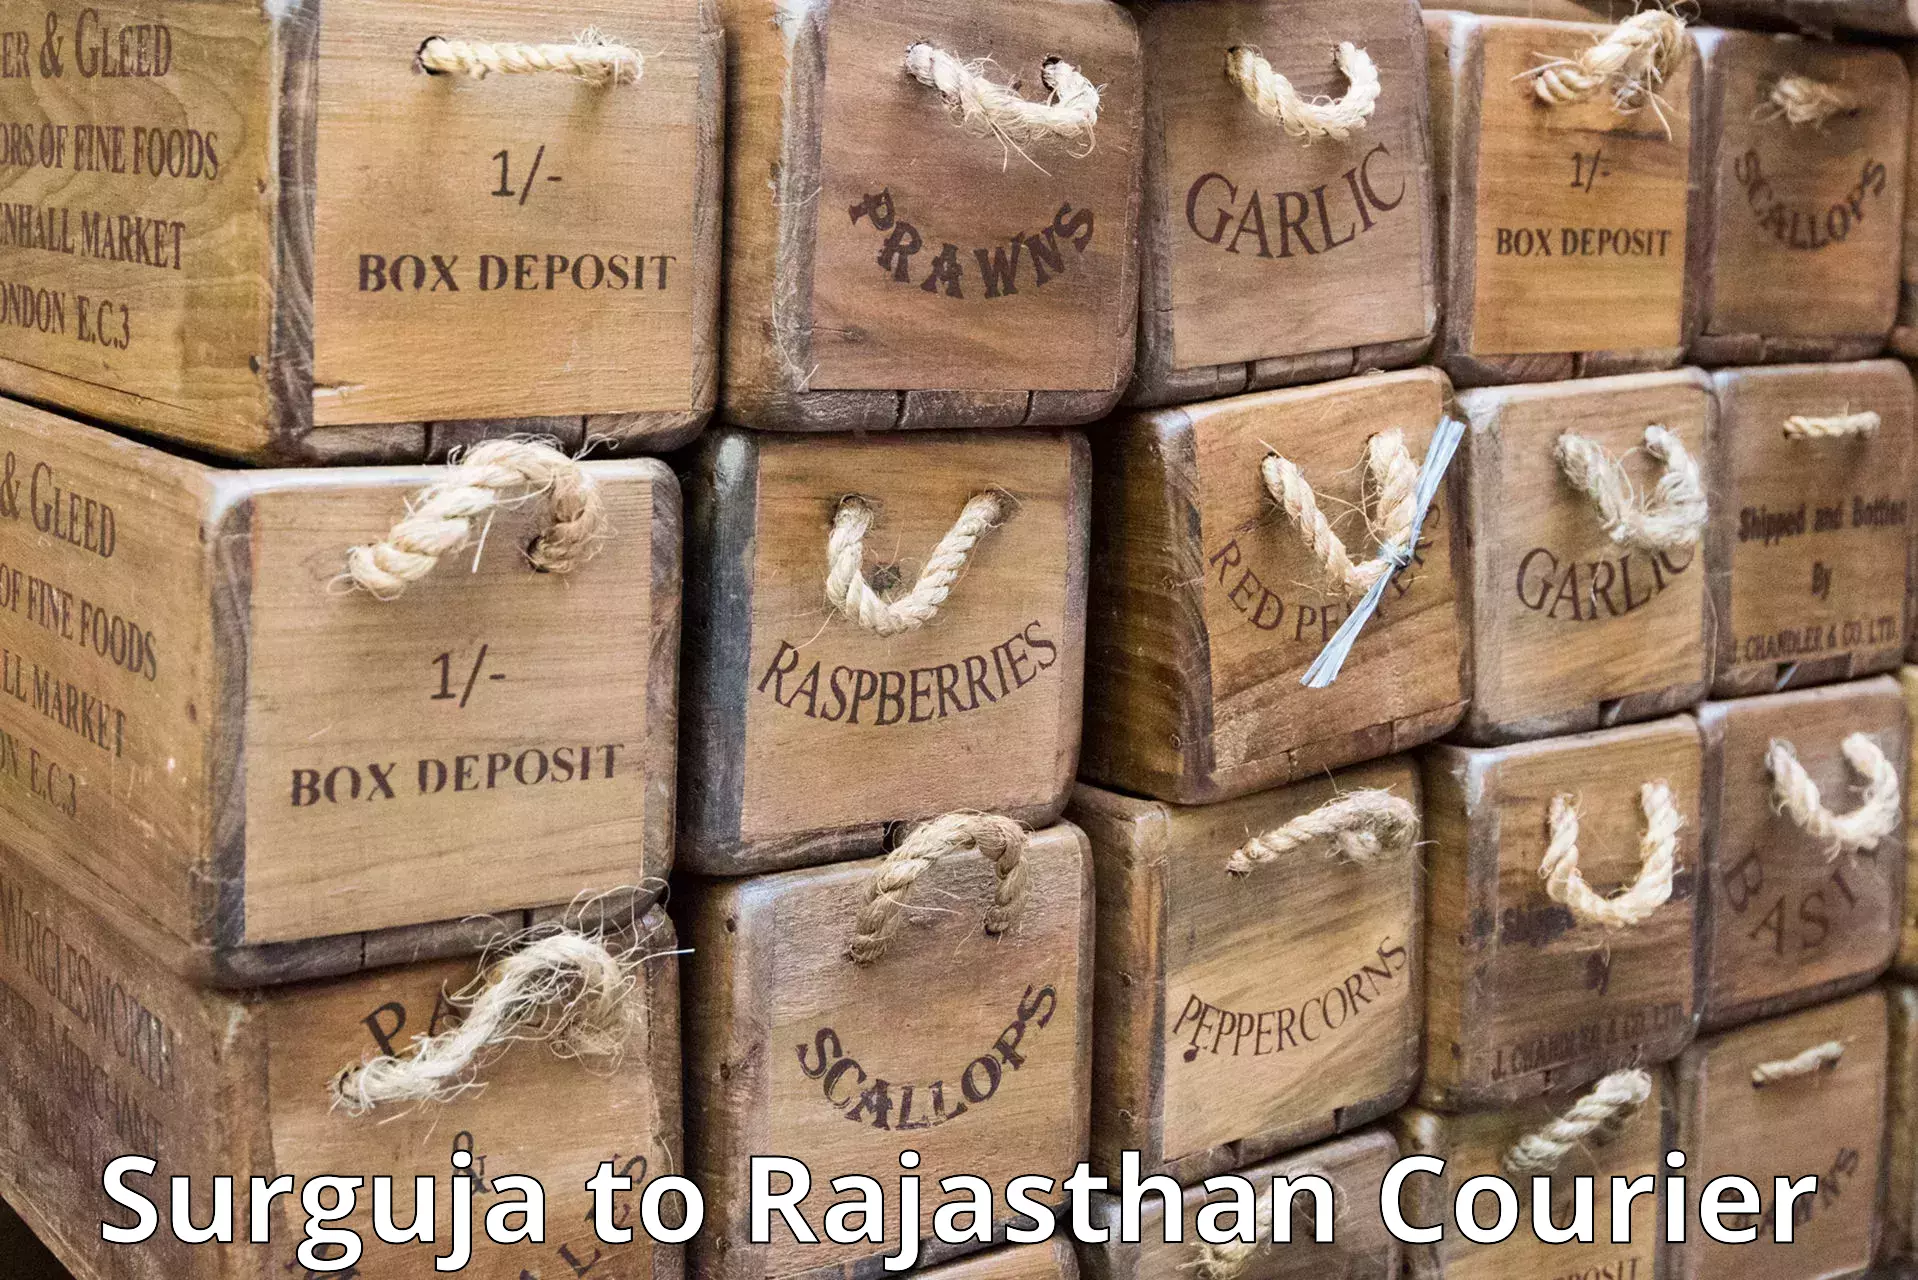 Holiday shipping services Surguja to Rajasthan